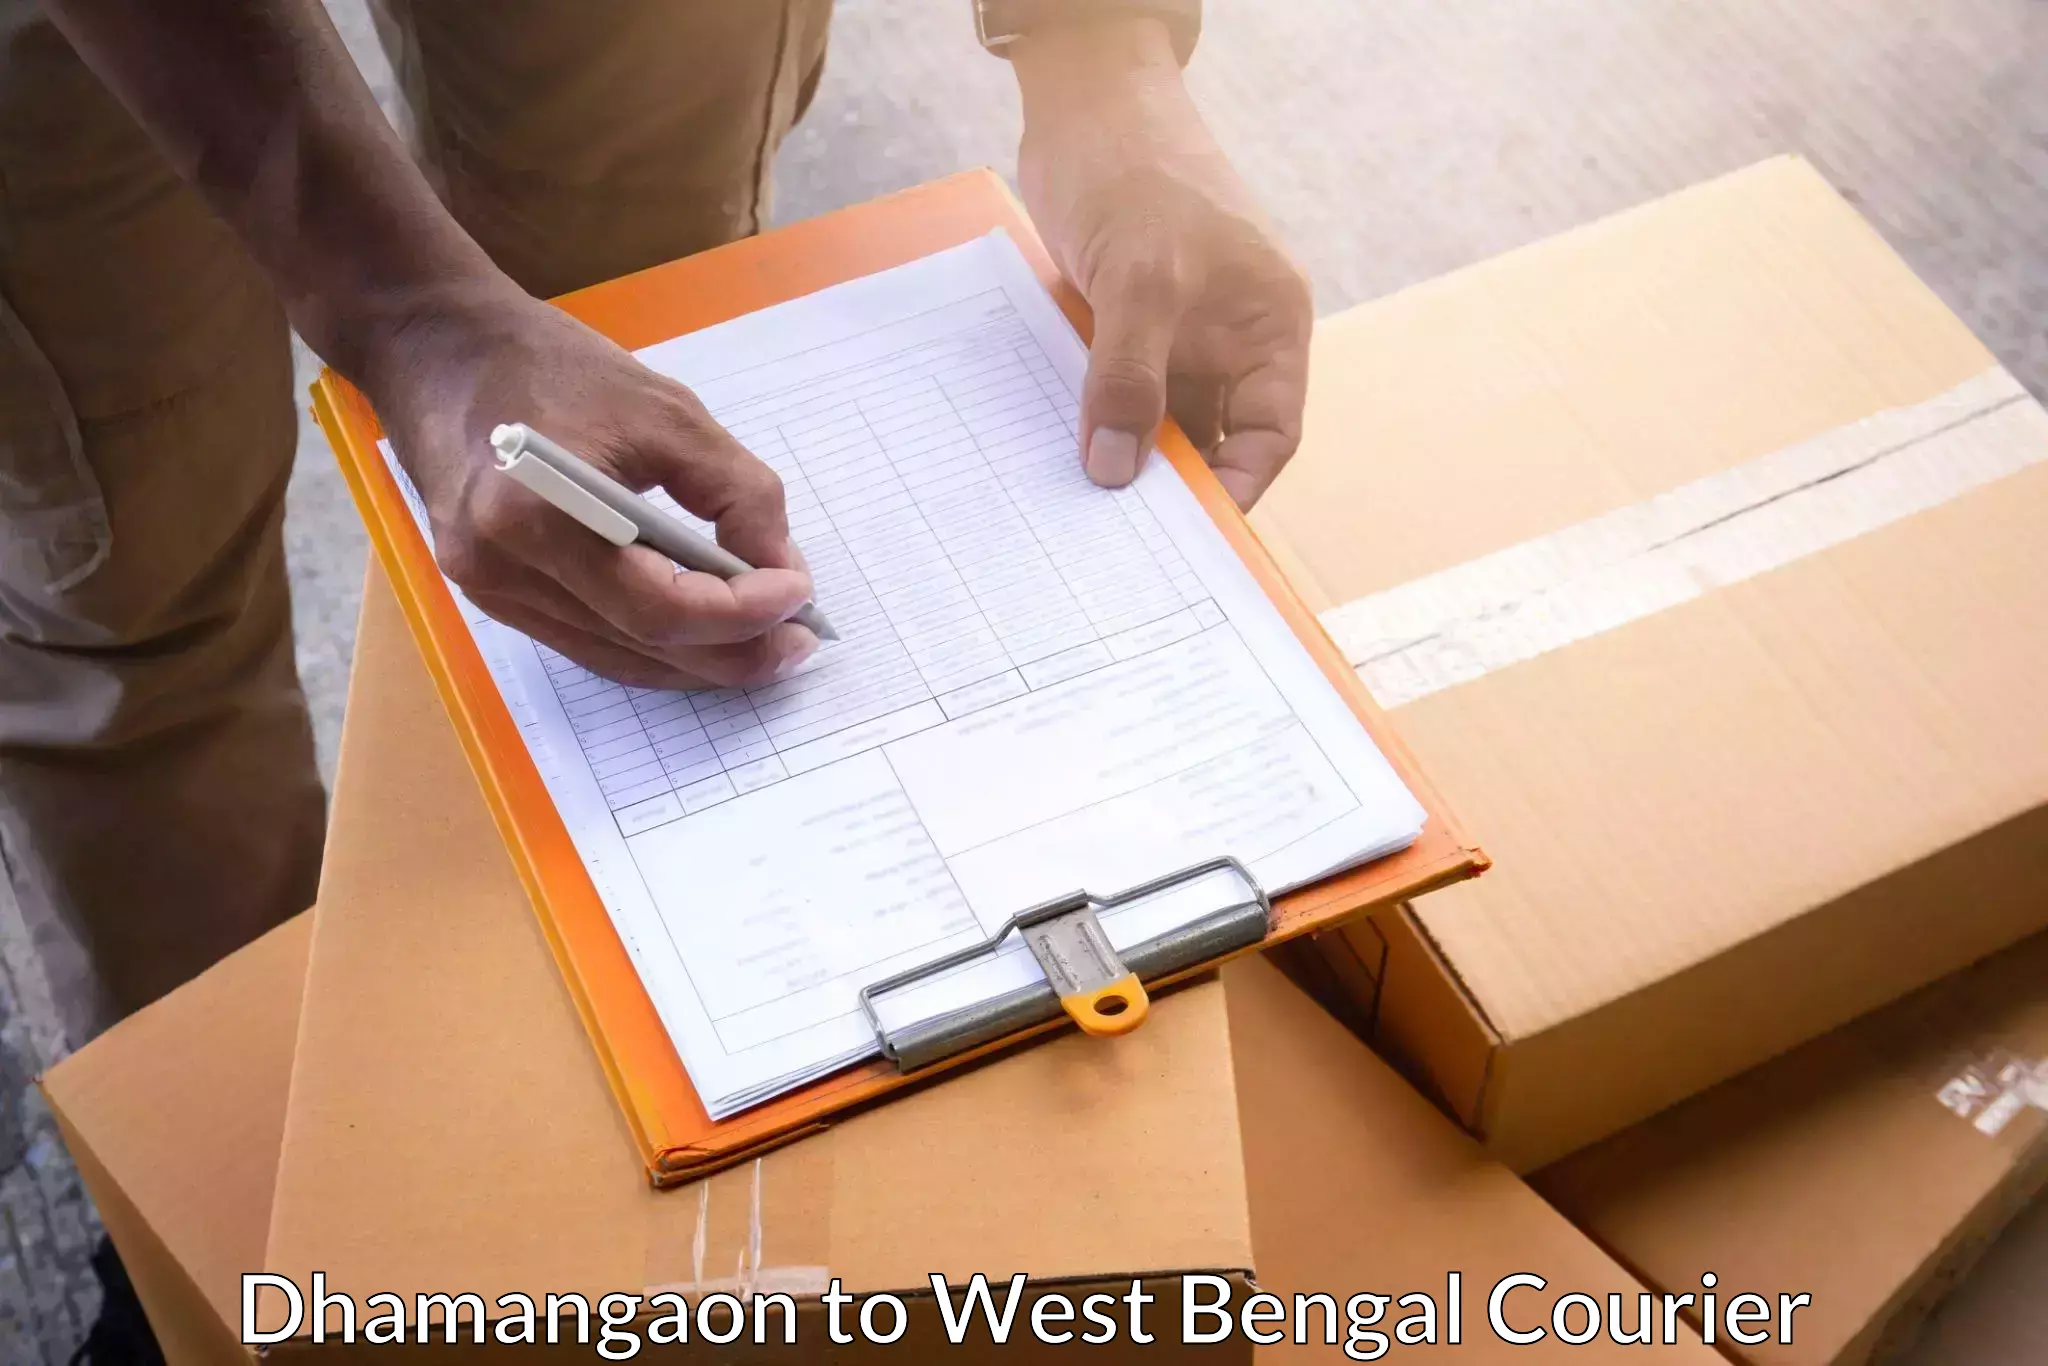 Cash on delivery service in Dhamangaon to Krishnanagar